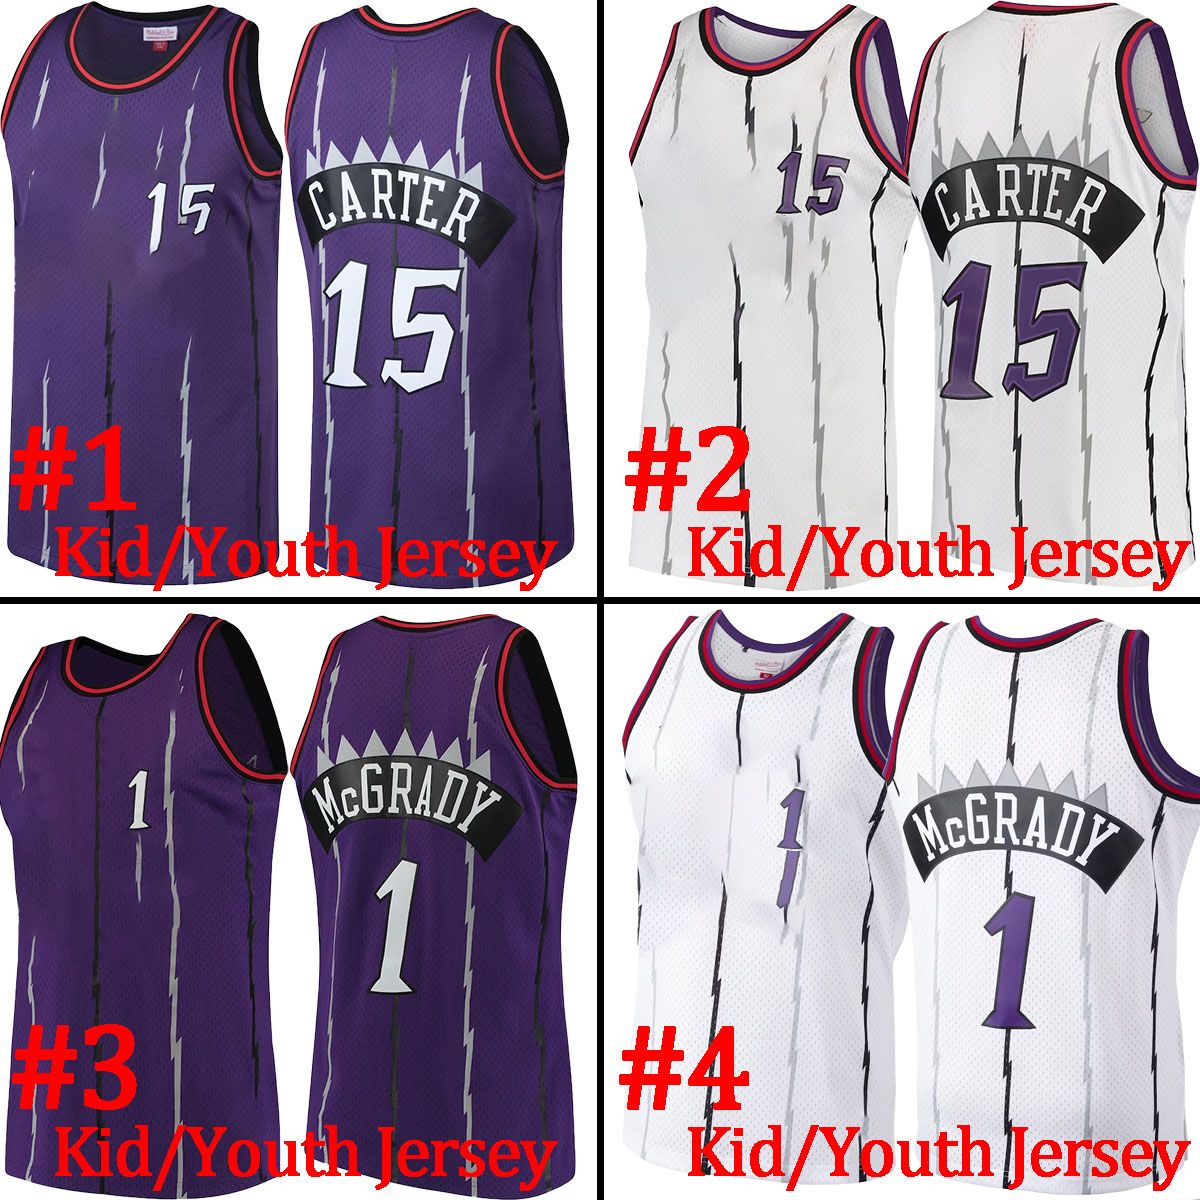 Youth/Kid Jersey-15